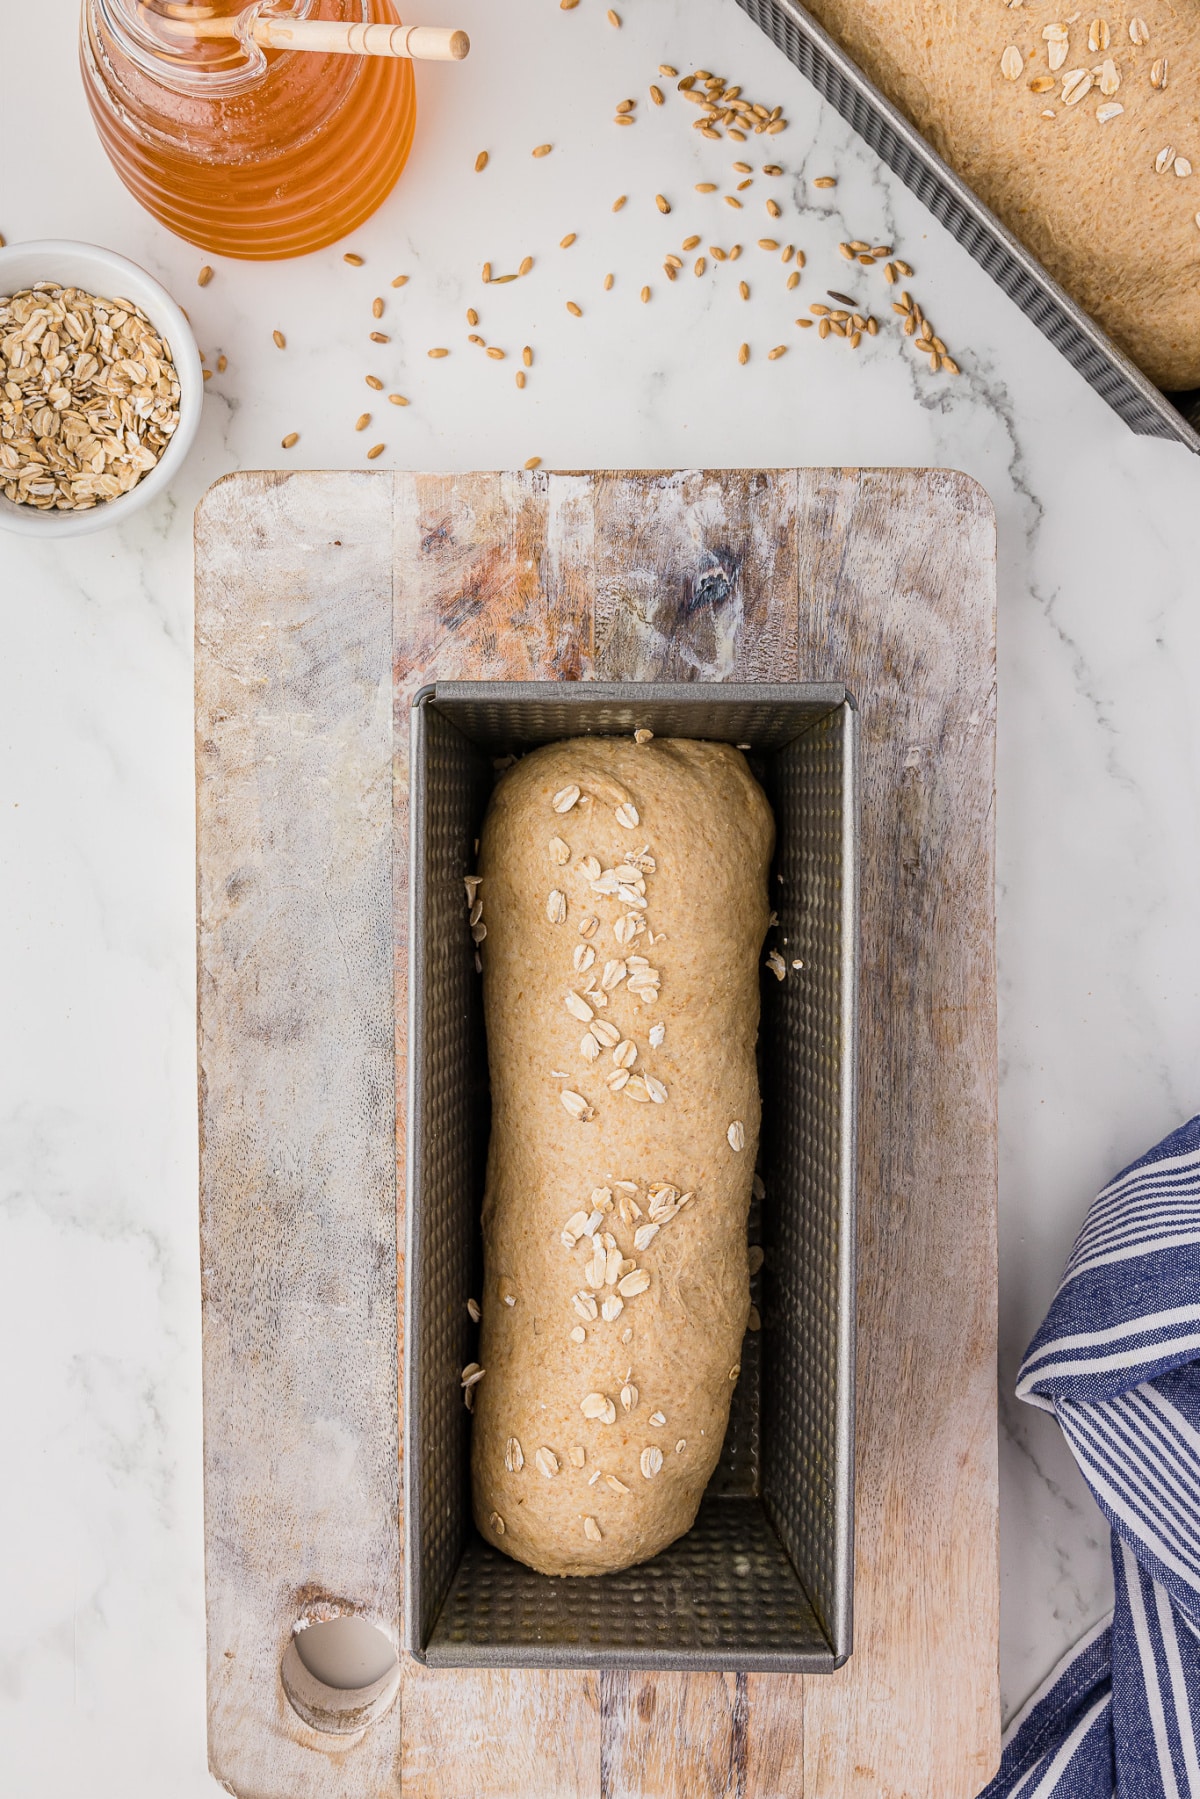 Bread dough shaped into a bread pan on a wooden cutting board with honey and oats laying on the counter